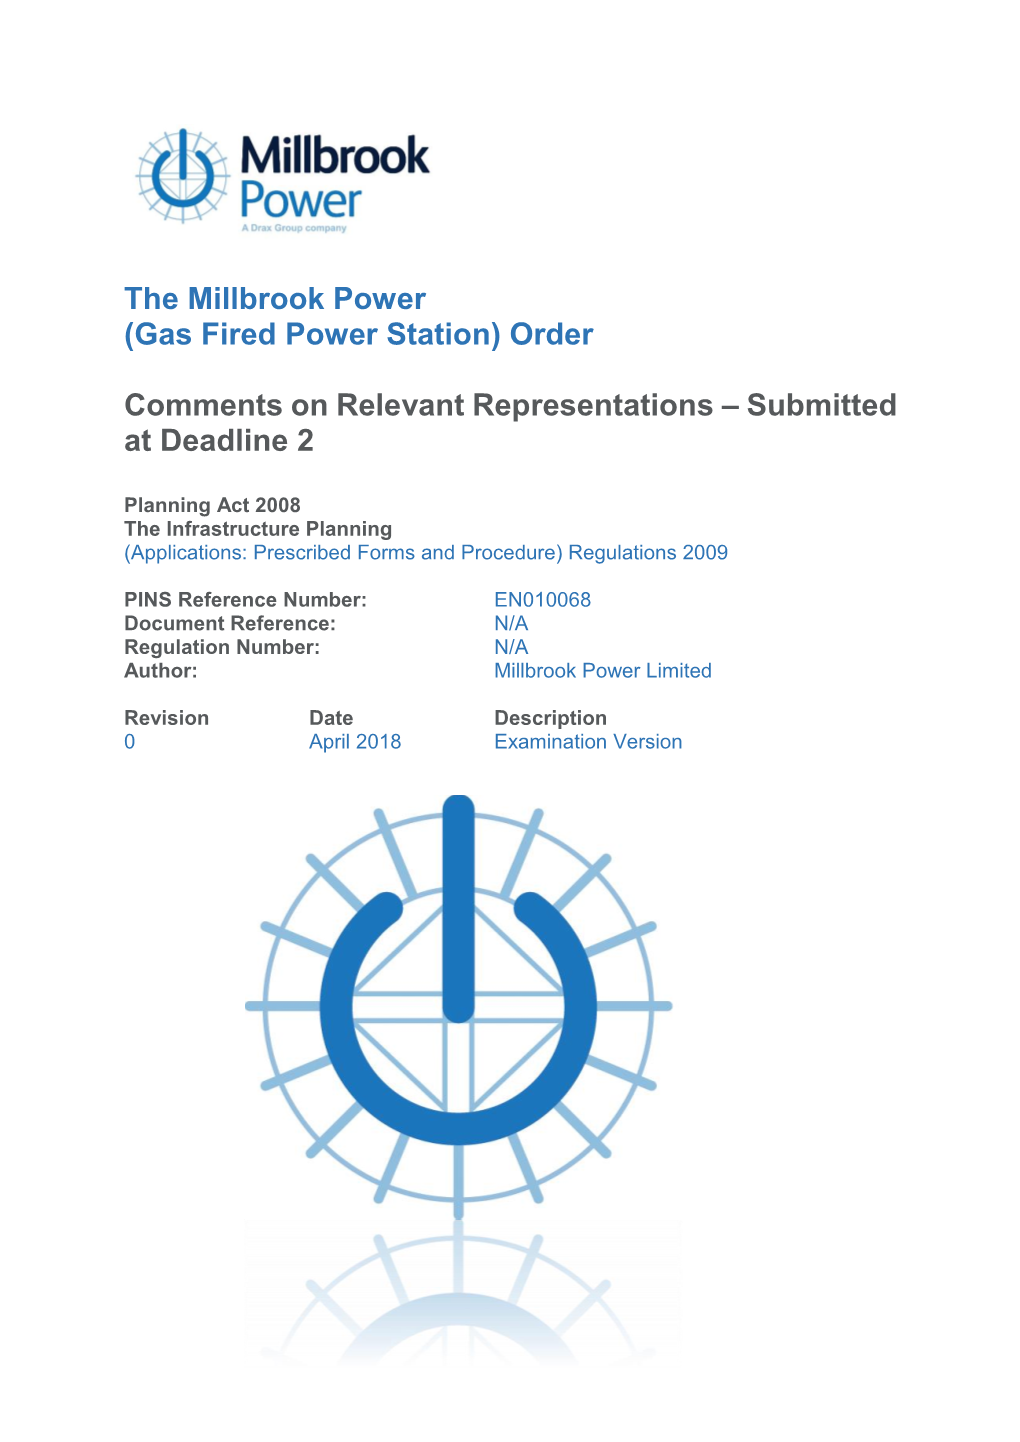 Millbrook Power Limited